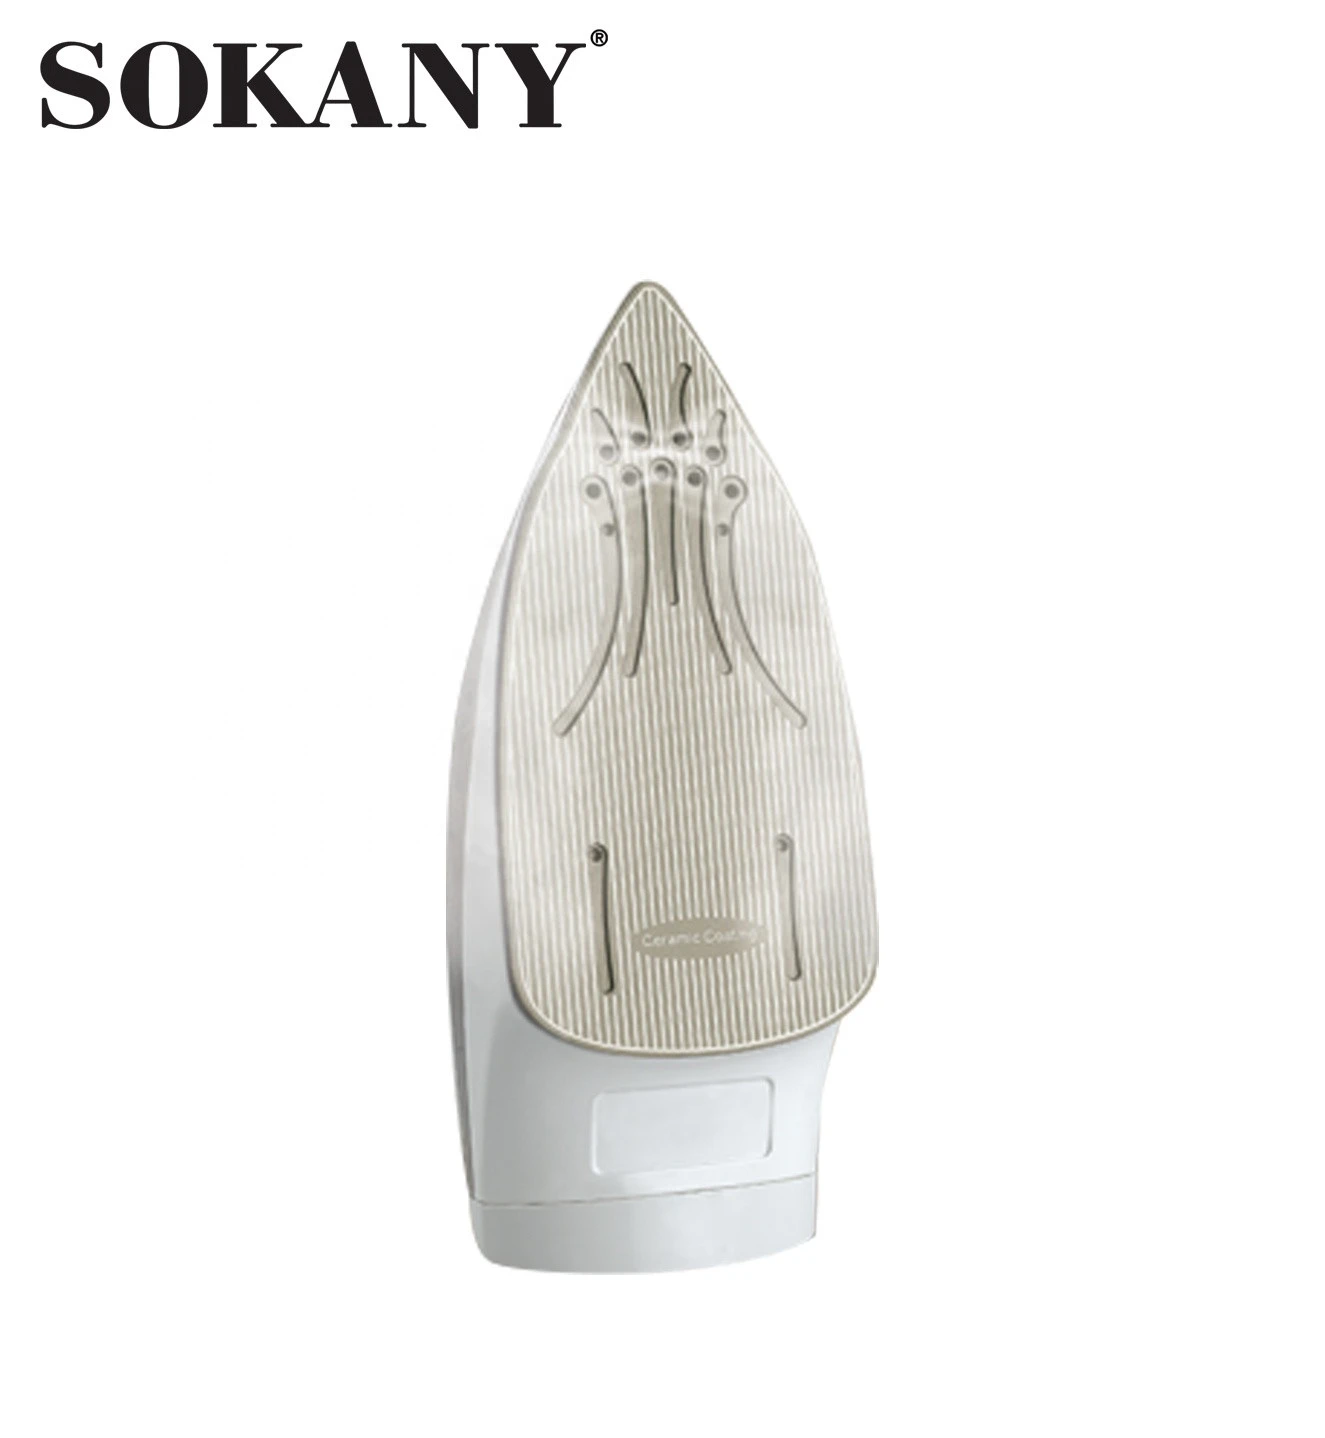 Sokany 2052 Electric Garment Steamer Iron For Clothes For Household Steam Generator  Ironing Ceramic Soleplate  Iron Steamer